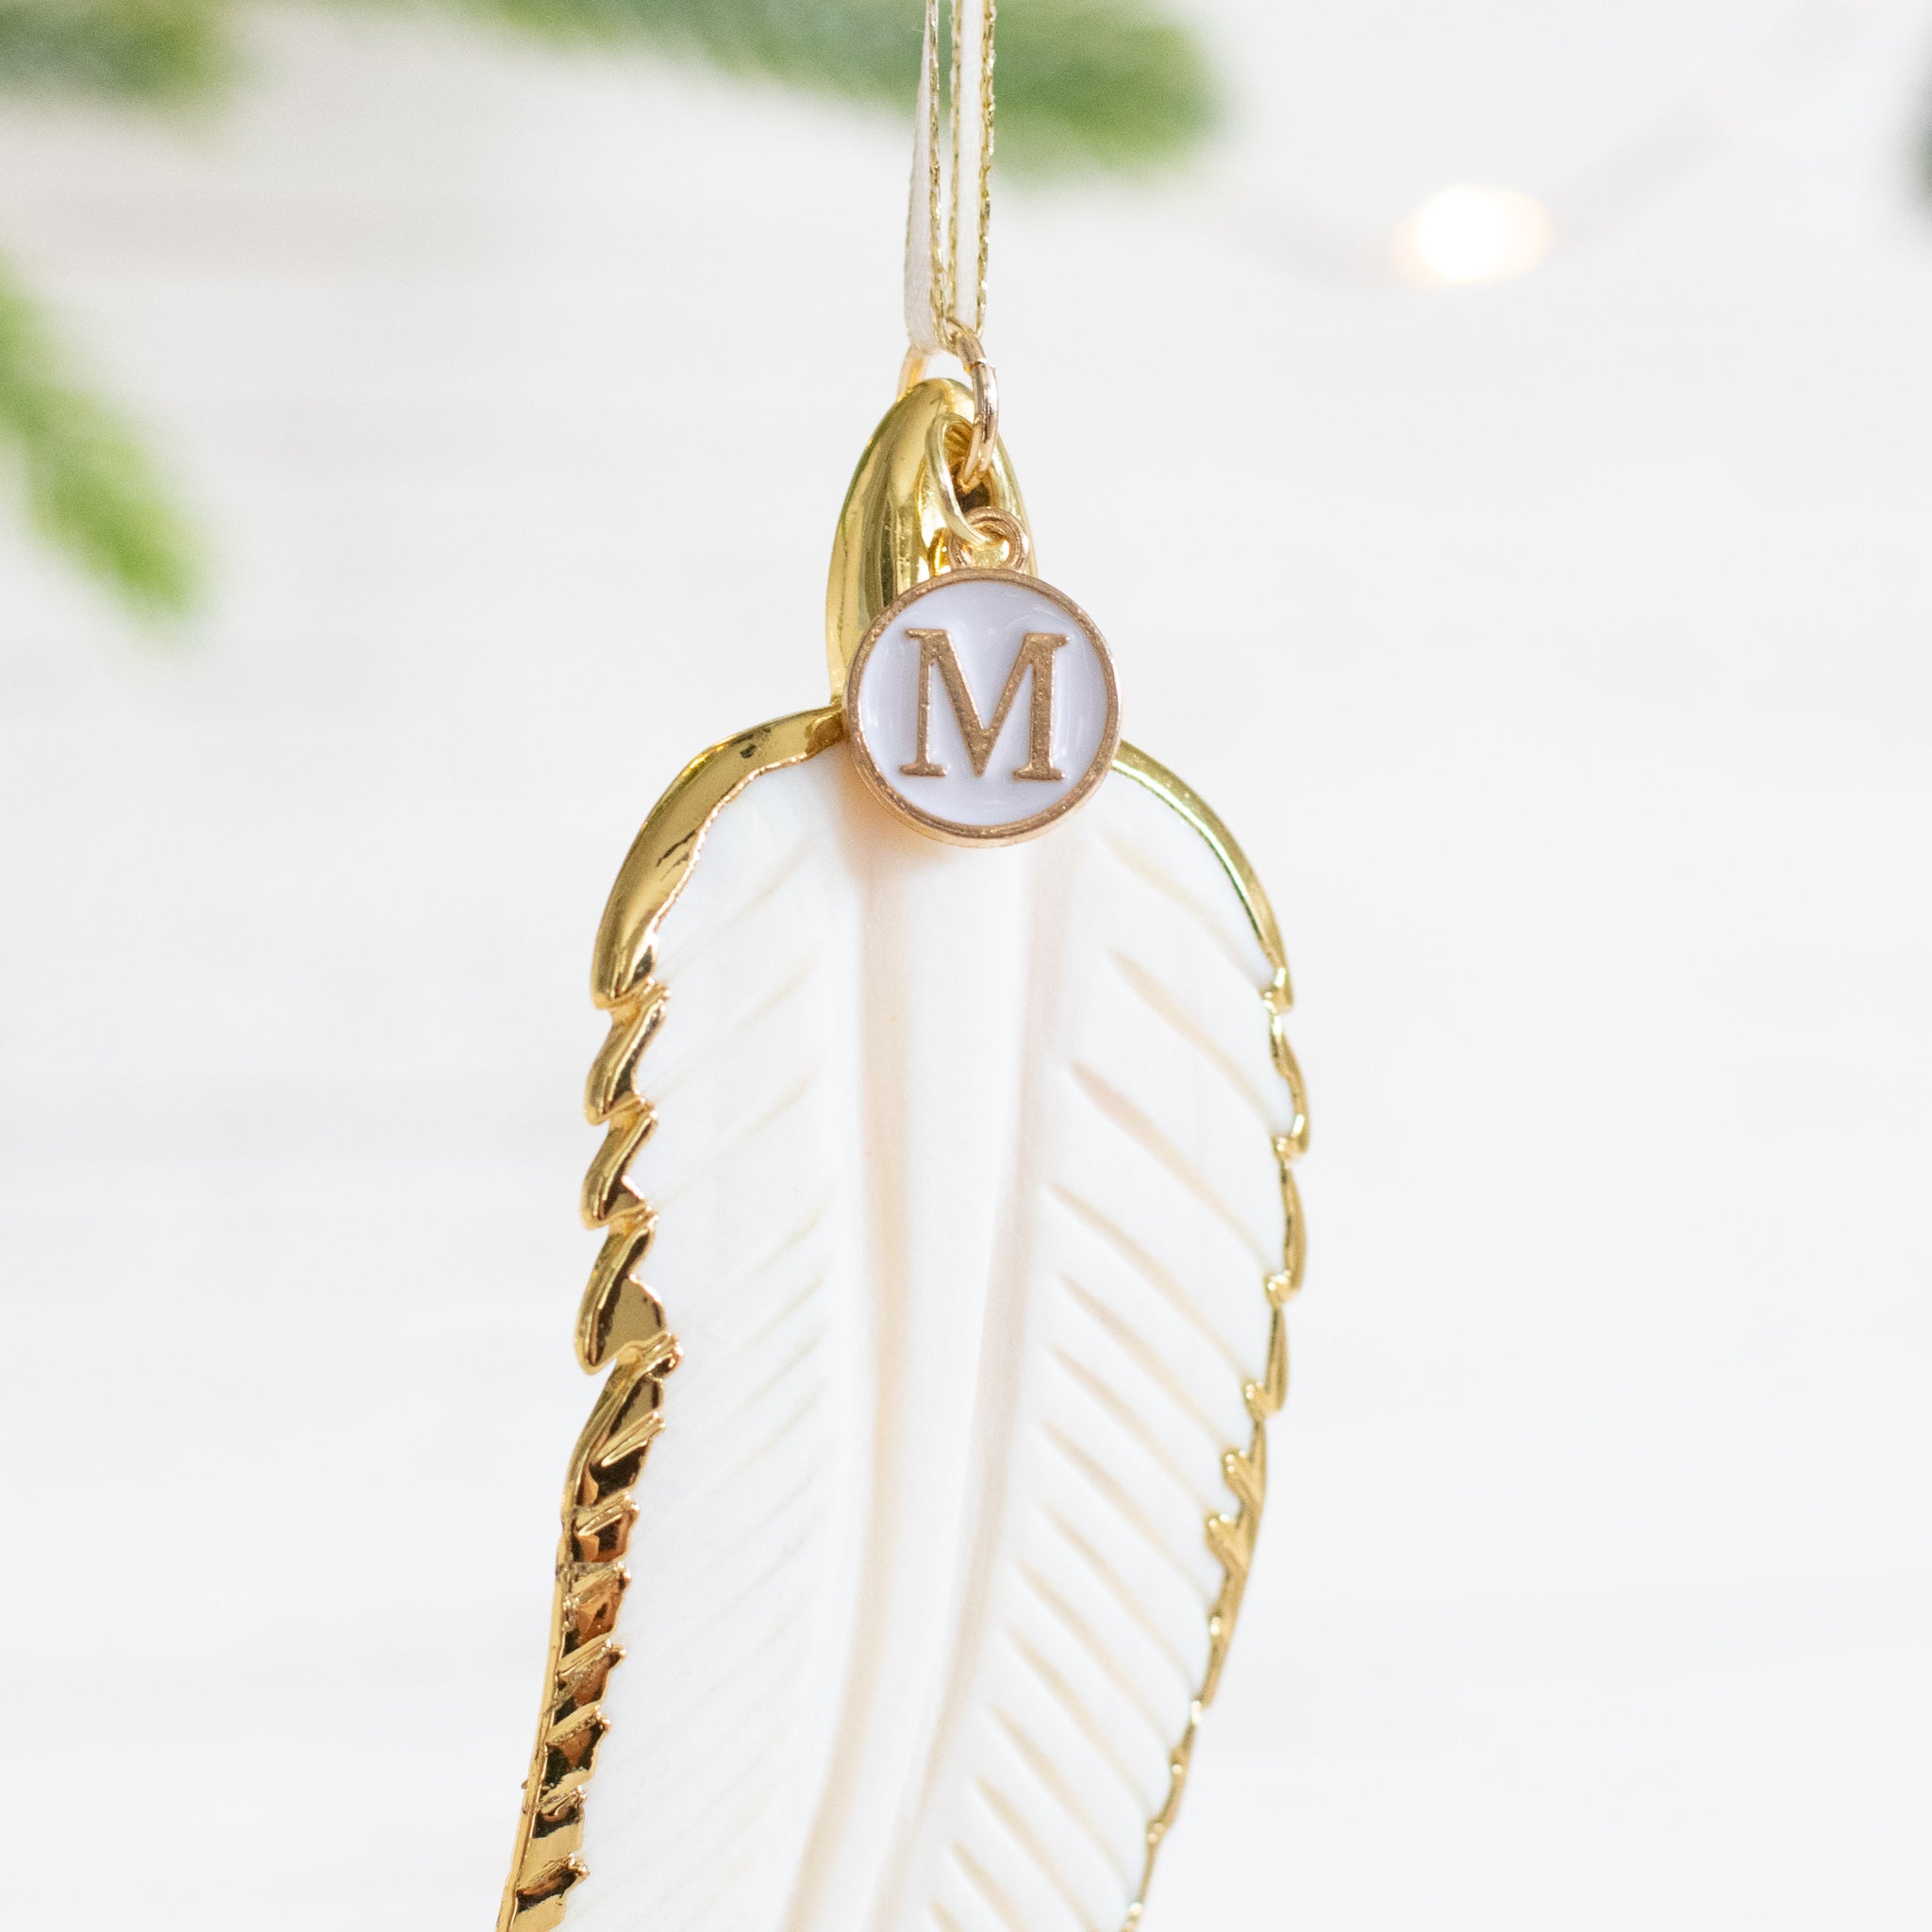 In Memory Feather Memorial Ornament - Grief Gift | laurelbox